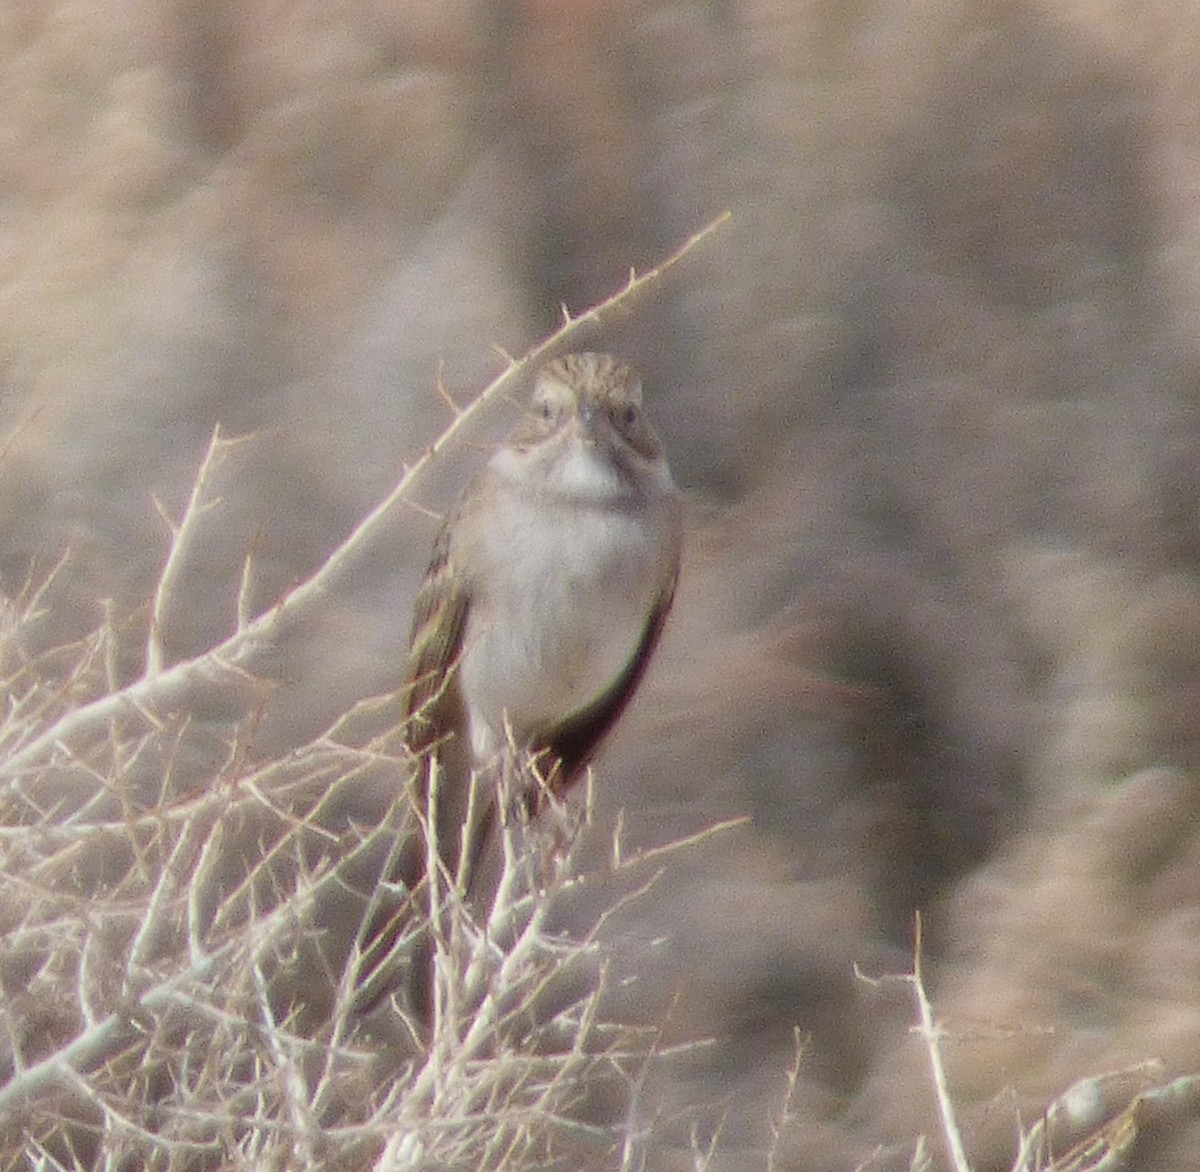 Chipping Sparrow - William Moramarco